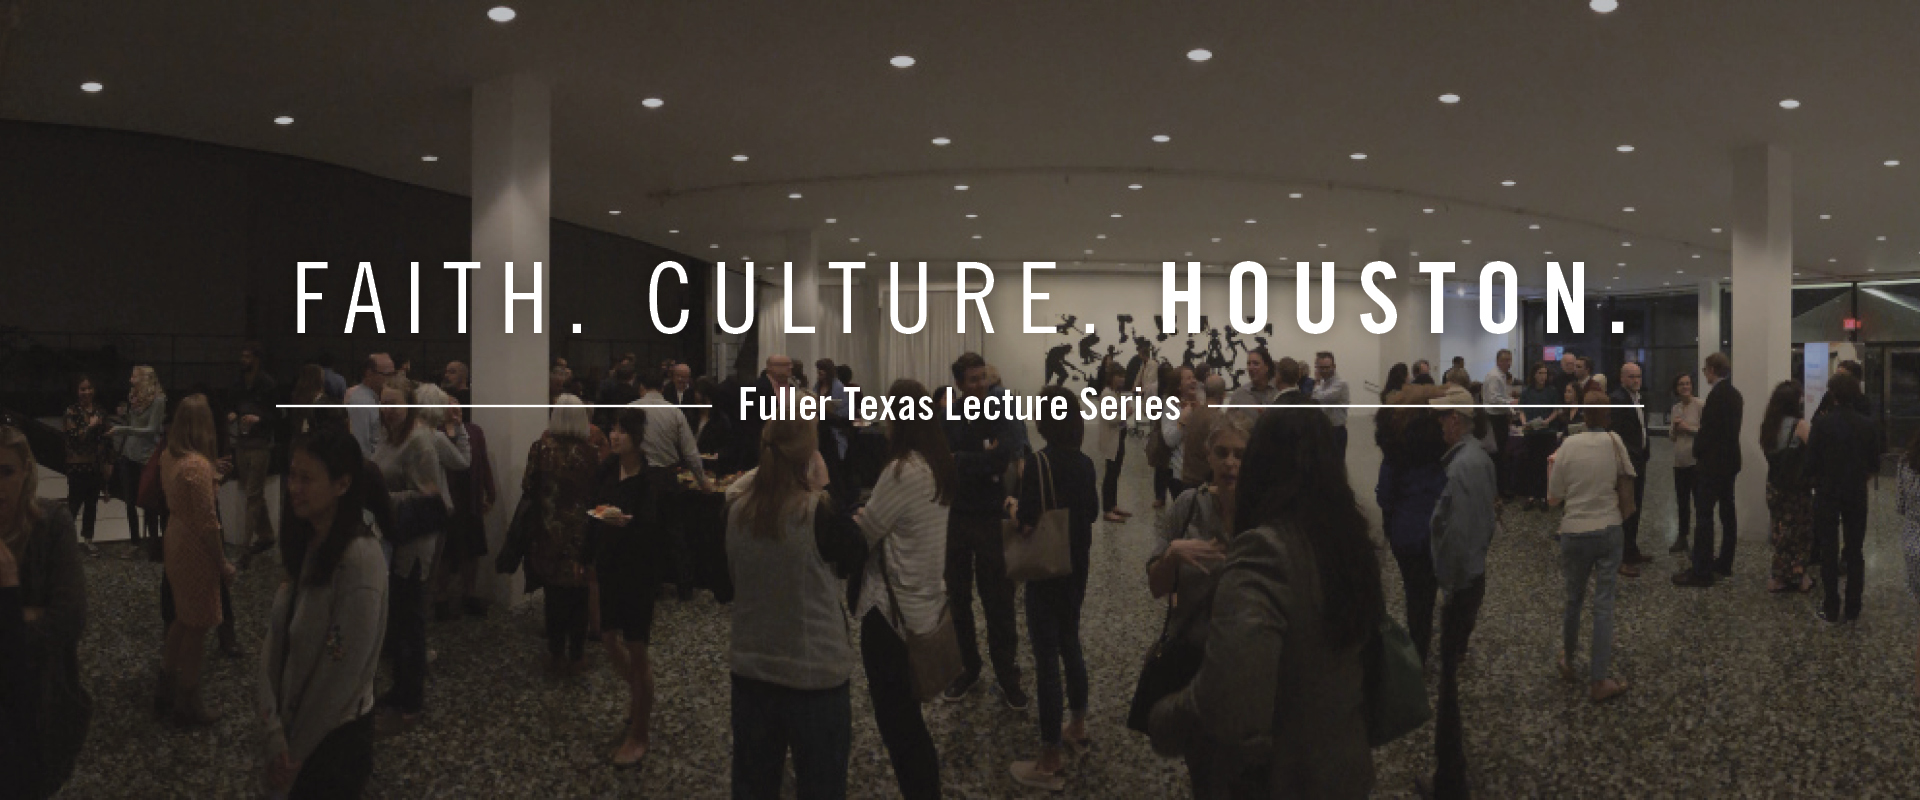 texas lectures banner